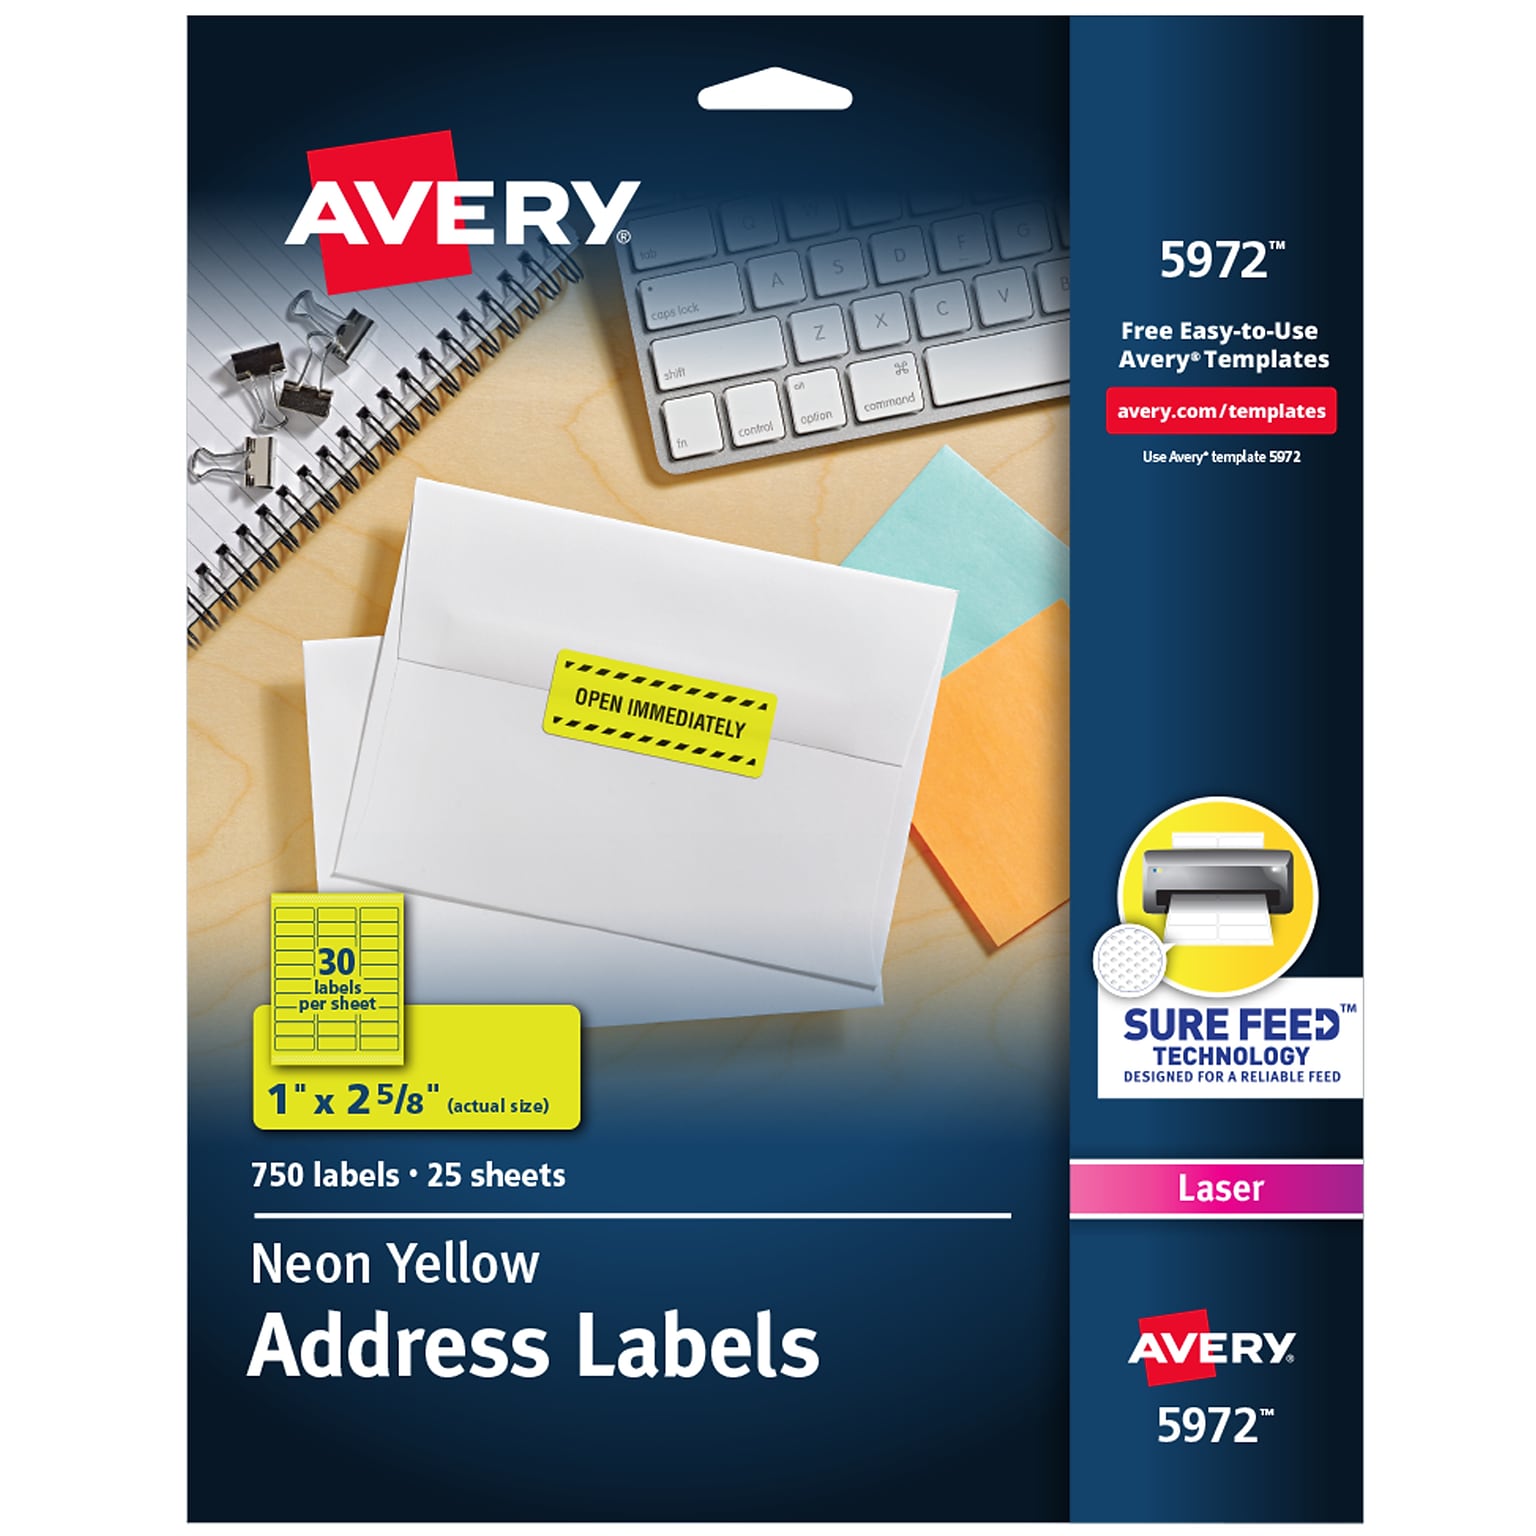 Avery Laser Address Labels, 1 x 2 5/8, Neon Yellow, 30 Labels/Sheet, 25 Sheets/Pack   (5972)